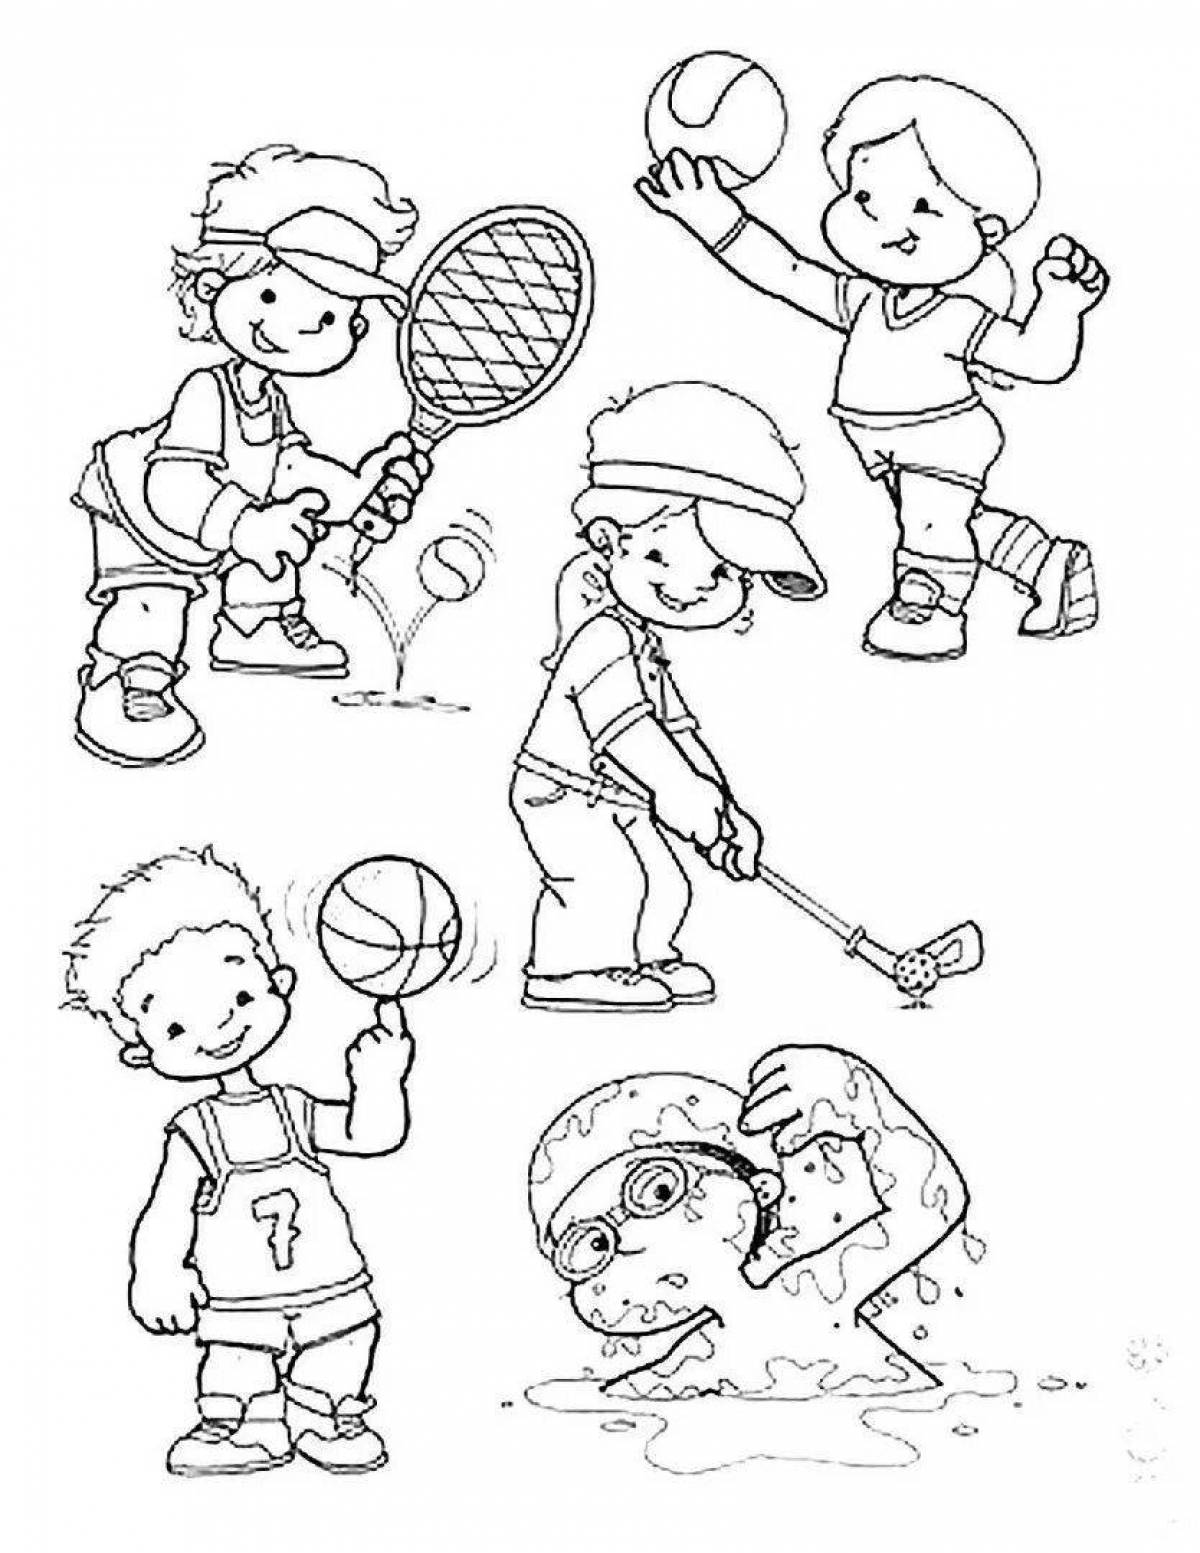 Attractive sports coloring pages for kids